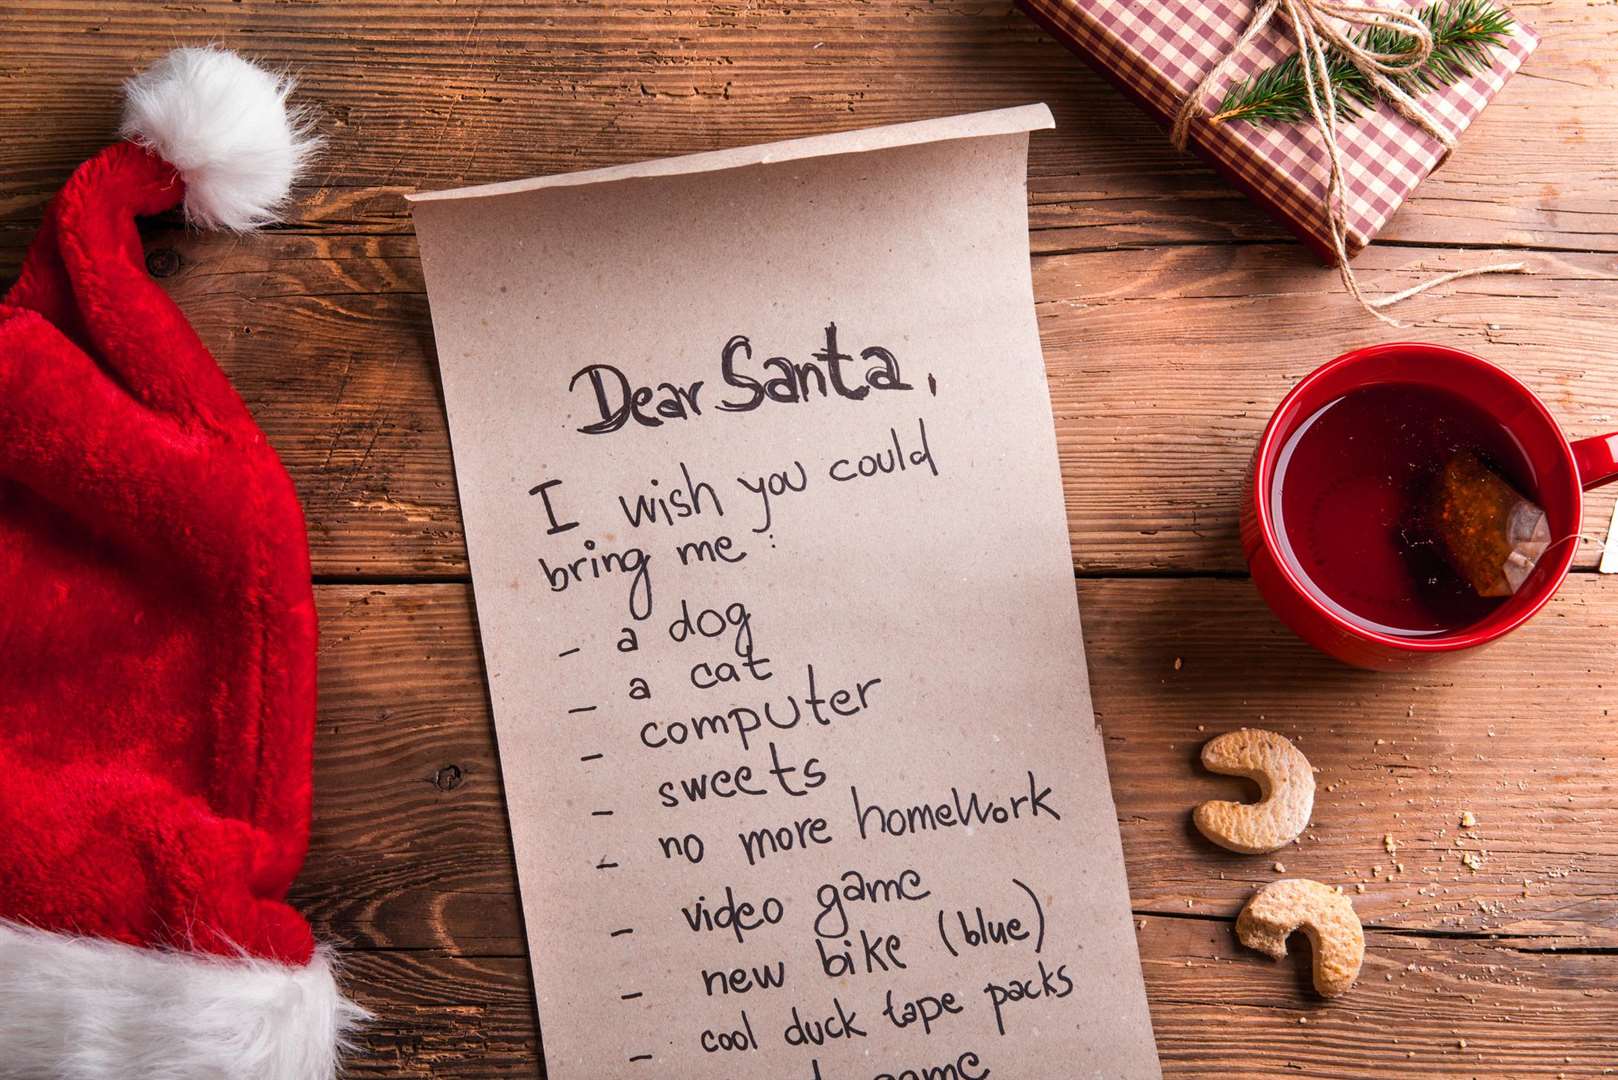 Send your letters to Santa by December 7